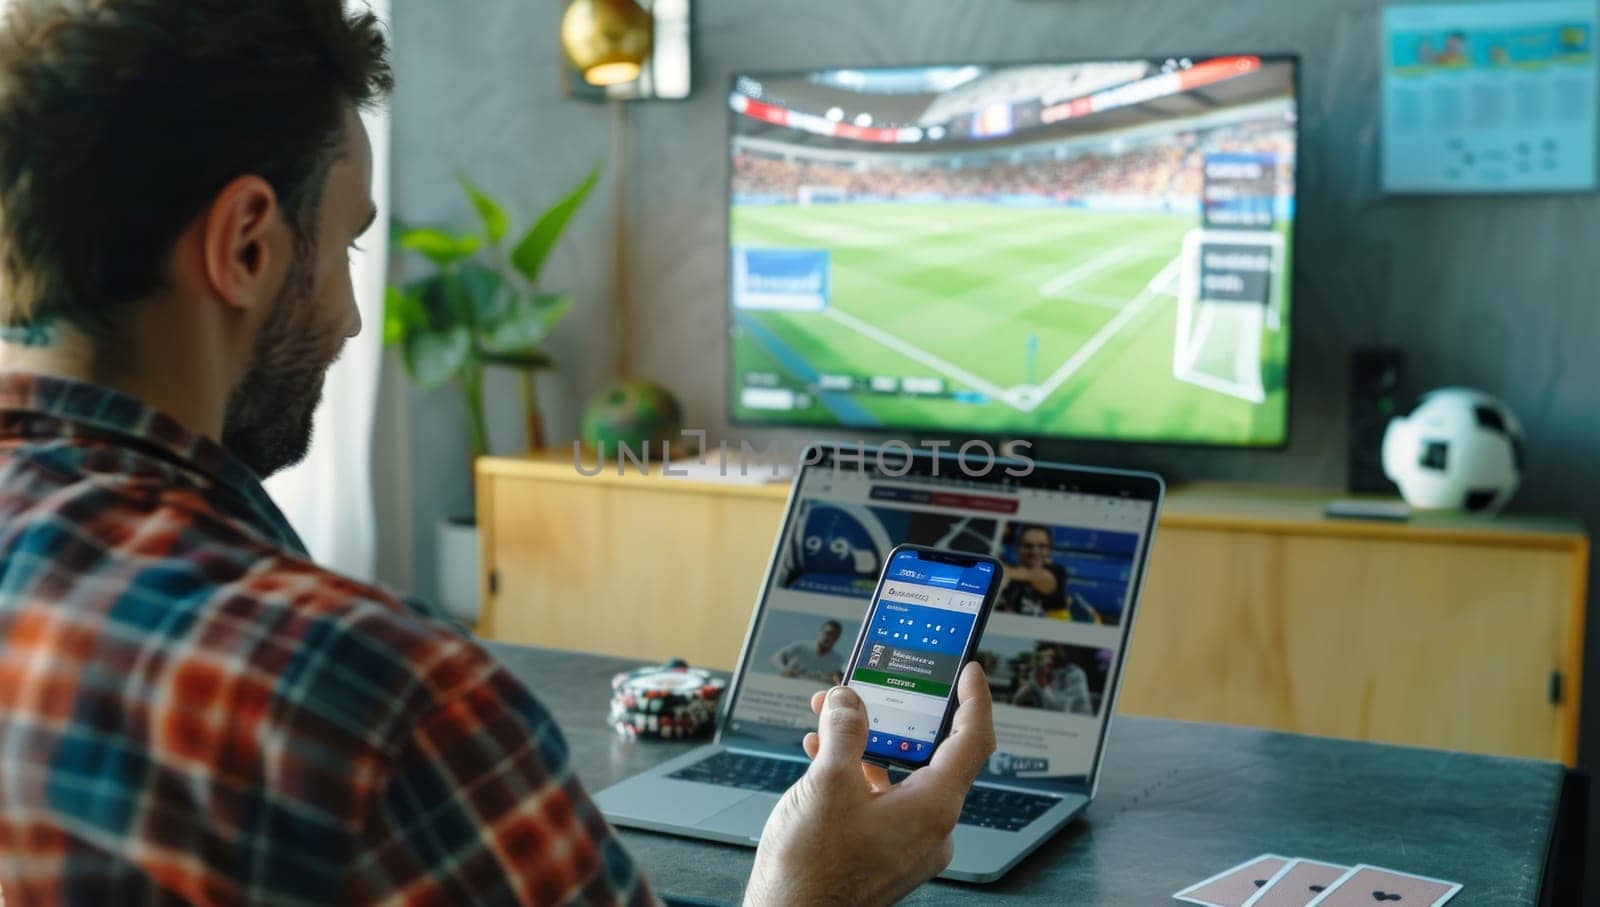 Rear view of a man that watches soccer match on television and bets on the game with betting app on phone.